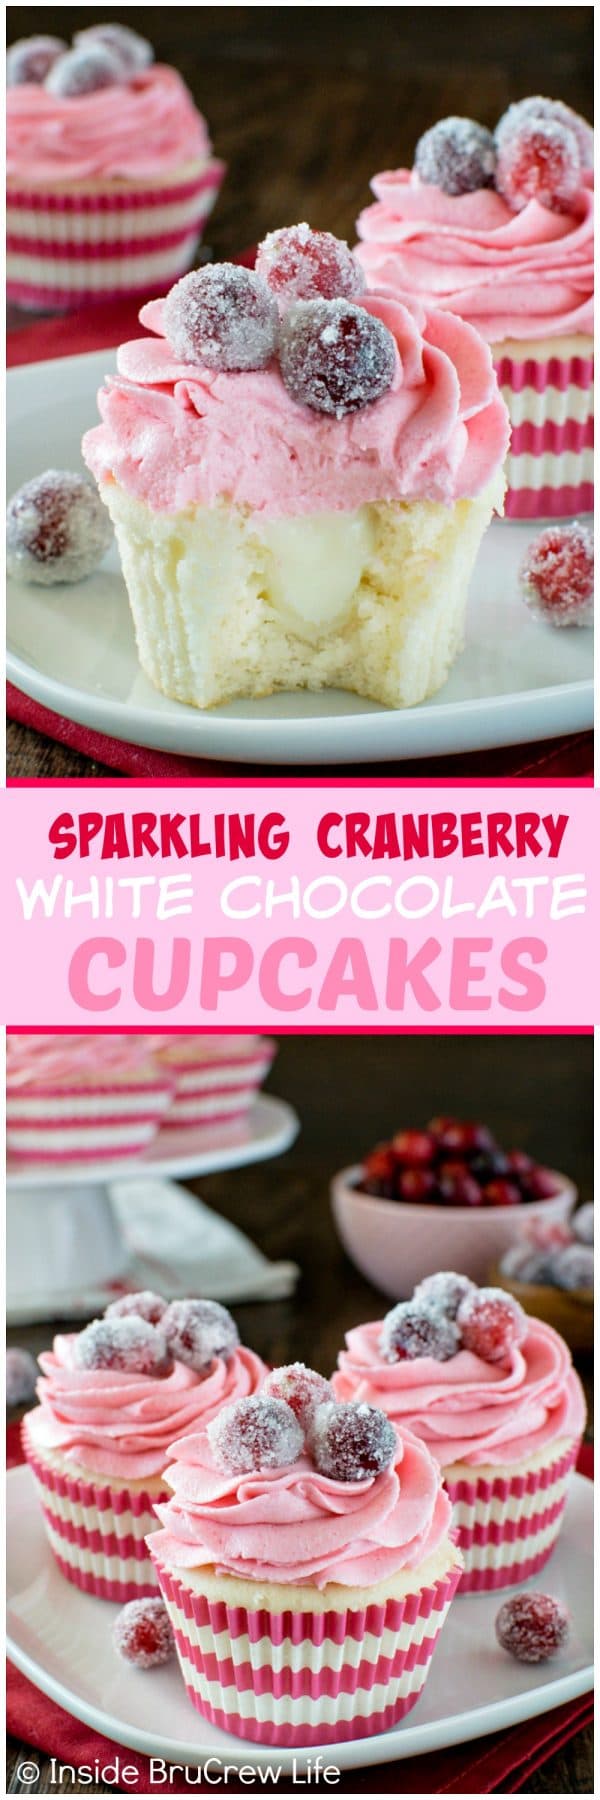 Sparkling Cranberry White Chocolate Cupcakes - a hidden creamy center & fresh berry frosting makes these cupcakes a fun recipe to make for your holiday dessert tables.